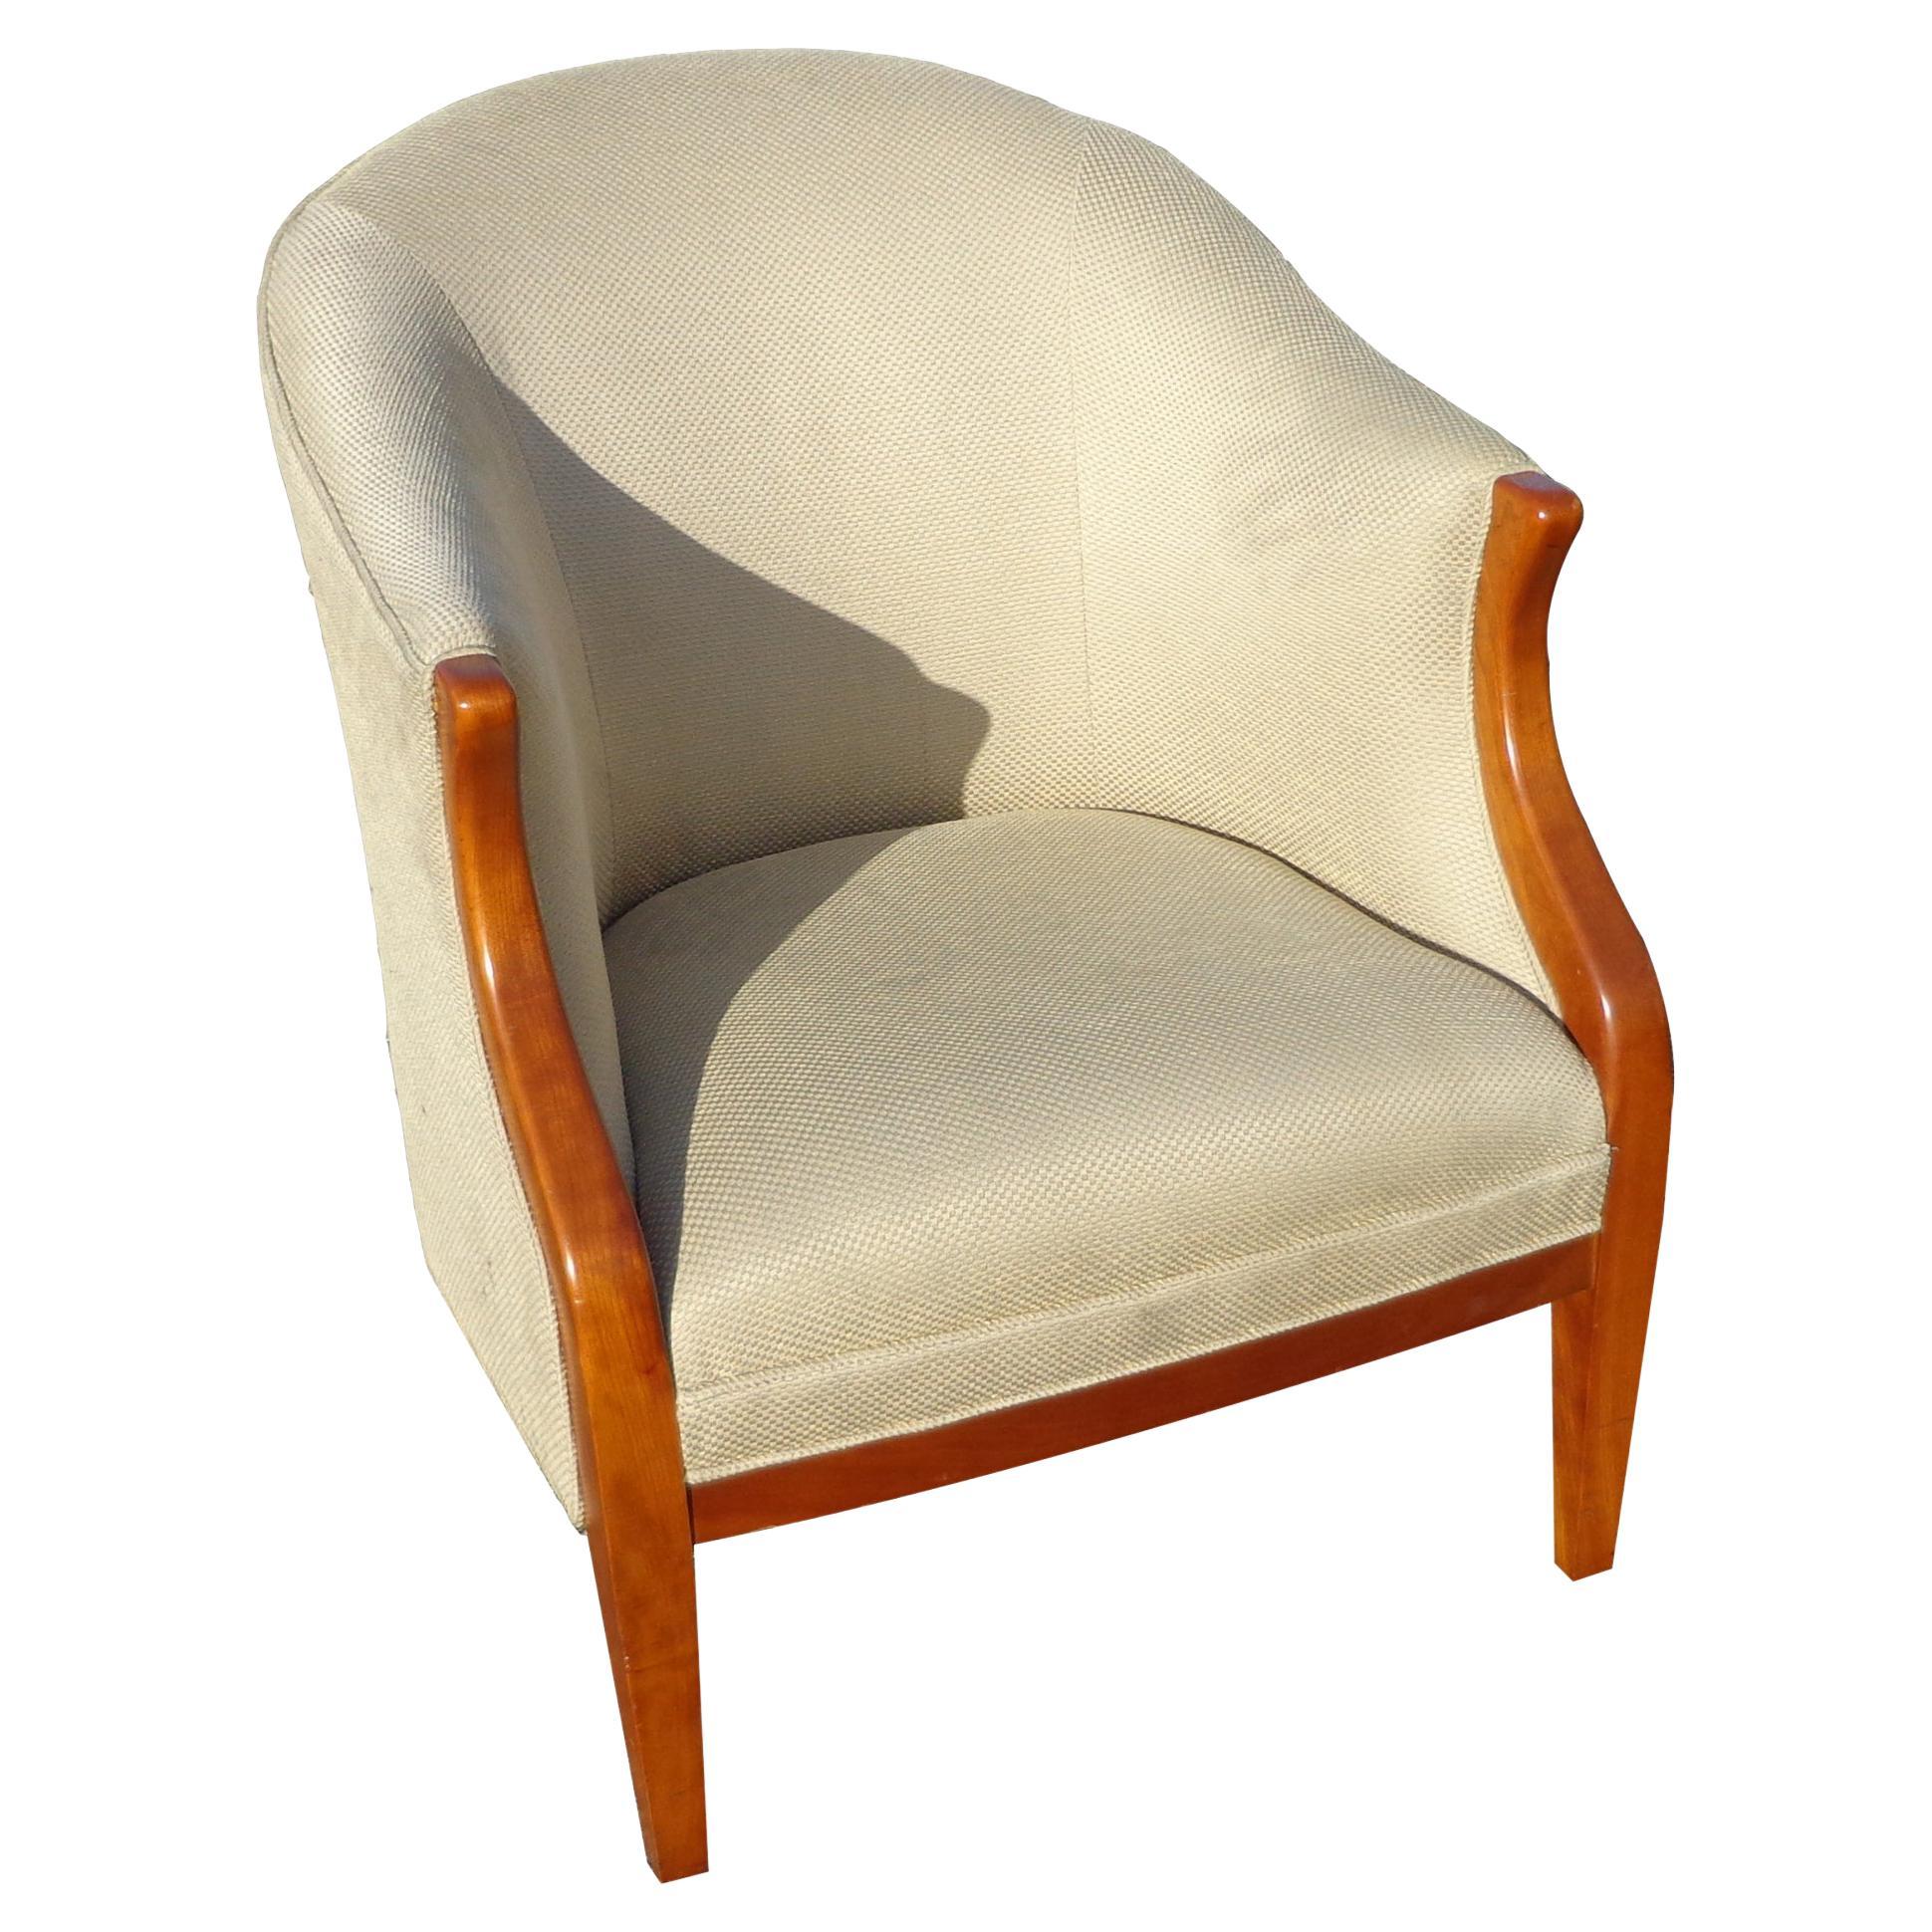 HBF lounge chair

Wonderful curves and lines in this modern version of a traditional, classic
lounge chair by HBF. Walnut frame and silk blend ivory upholstery.